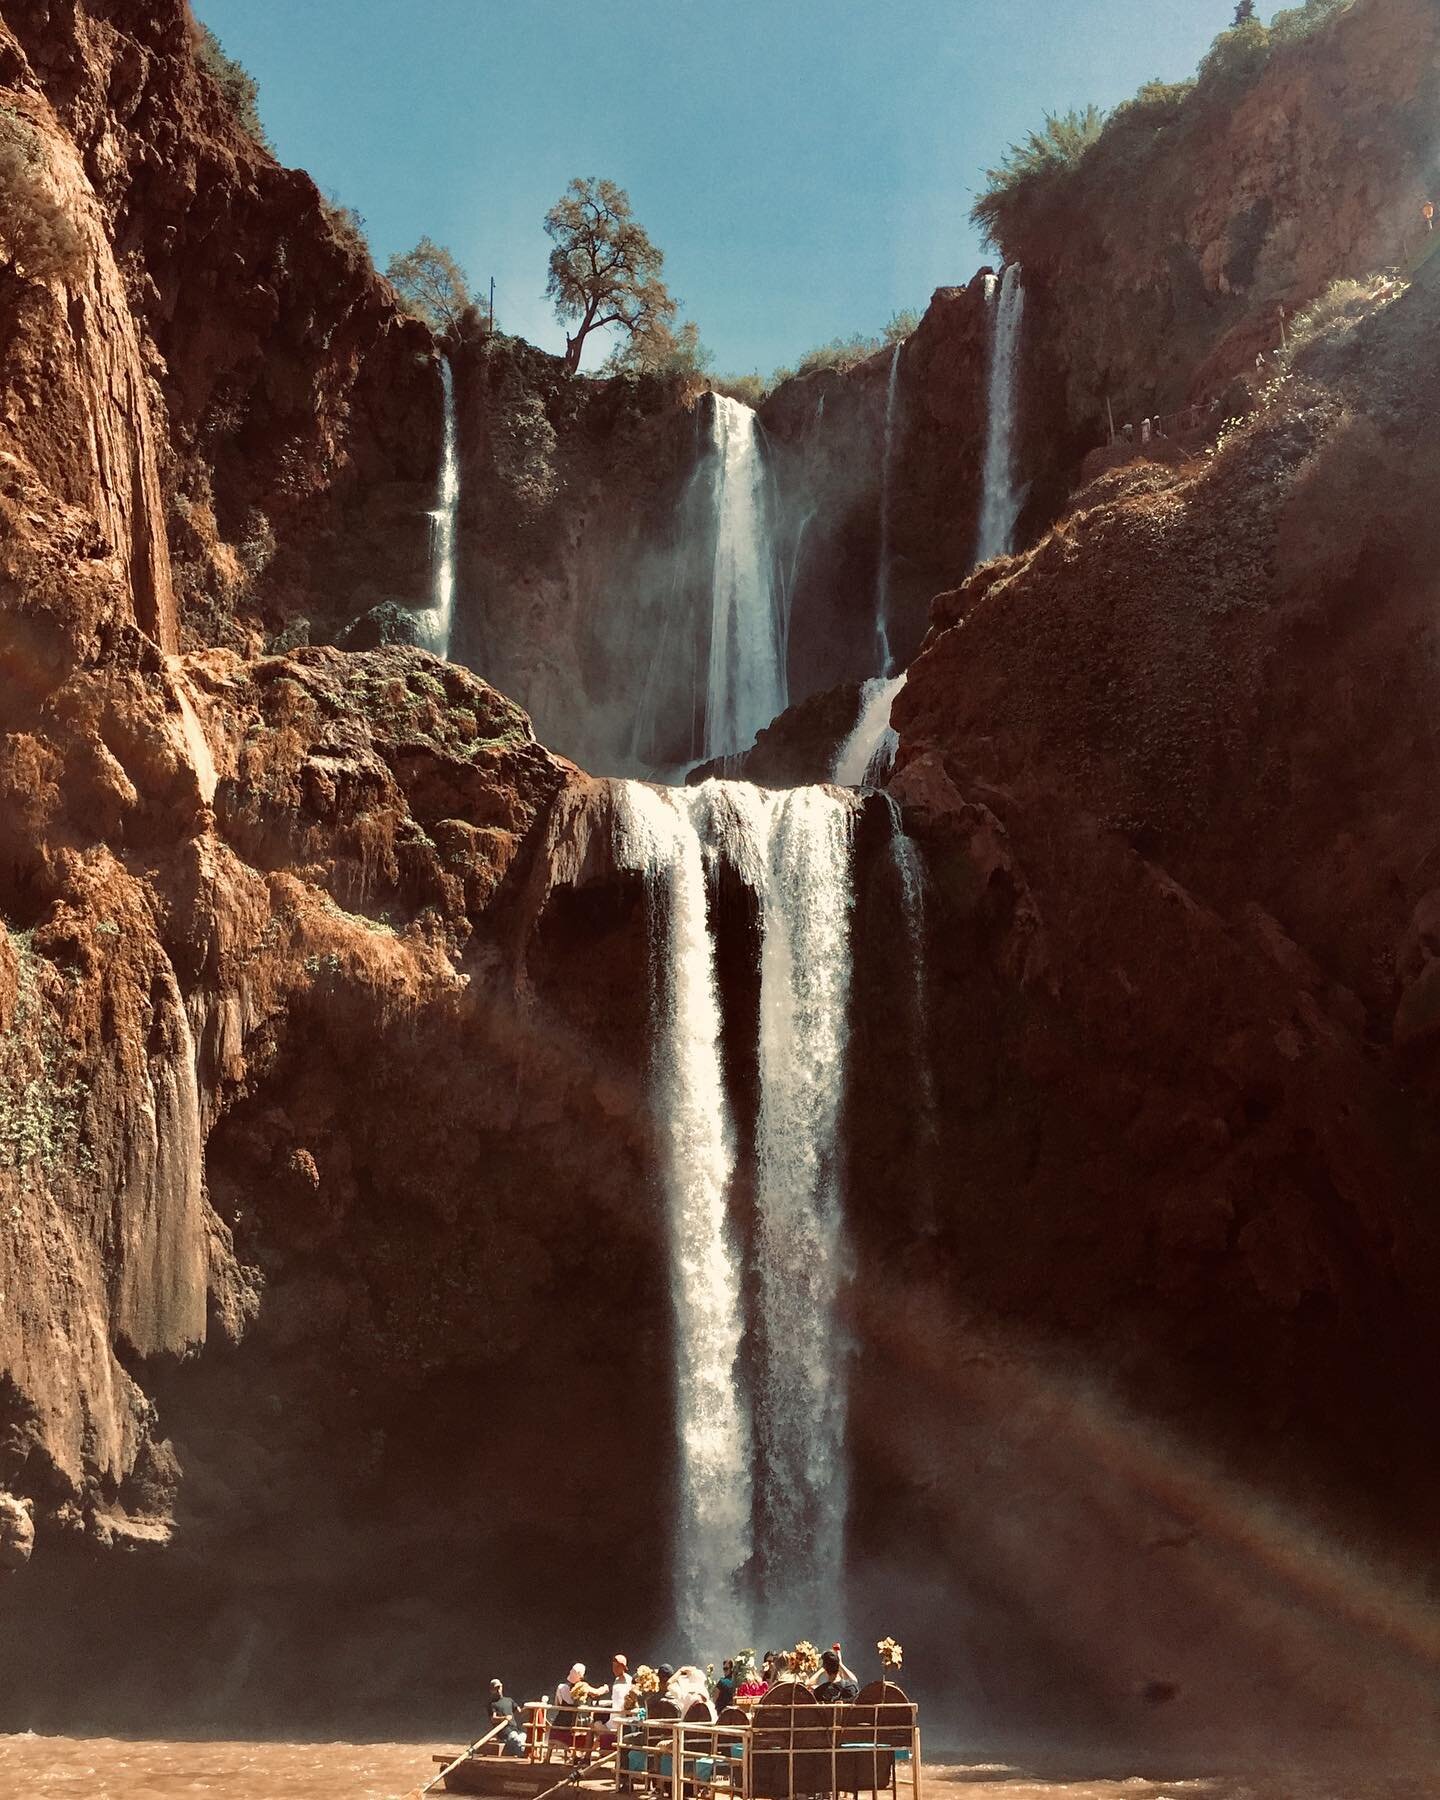 The Ouzoud waterfall is about a 3 hour bus ride from the city of Marrakech, it&rsquo;s a beautiful opening of a series of underground springs that make this natural spectacle. It&rsquo;s a short hike to the bottom of the falls and there is a boat rid